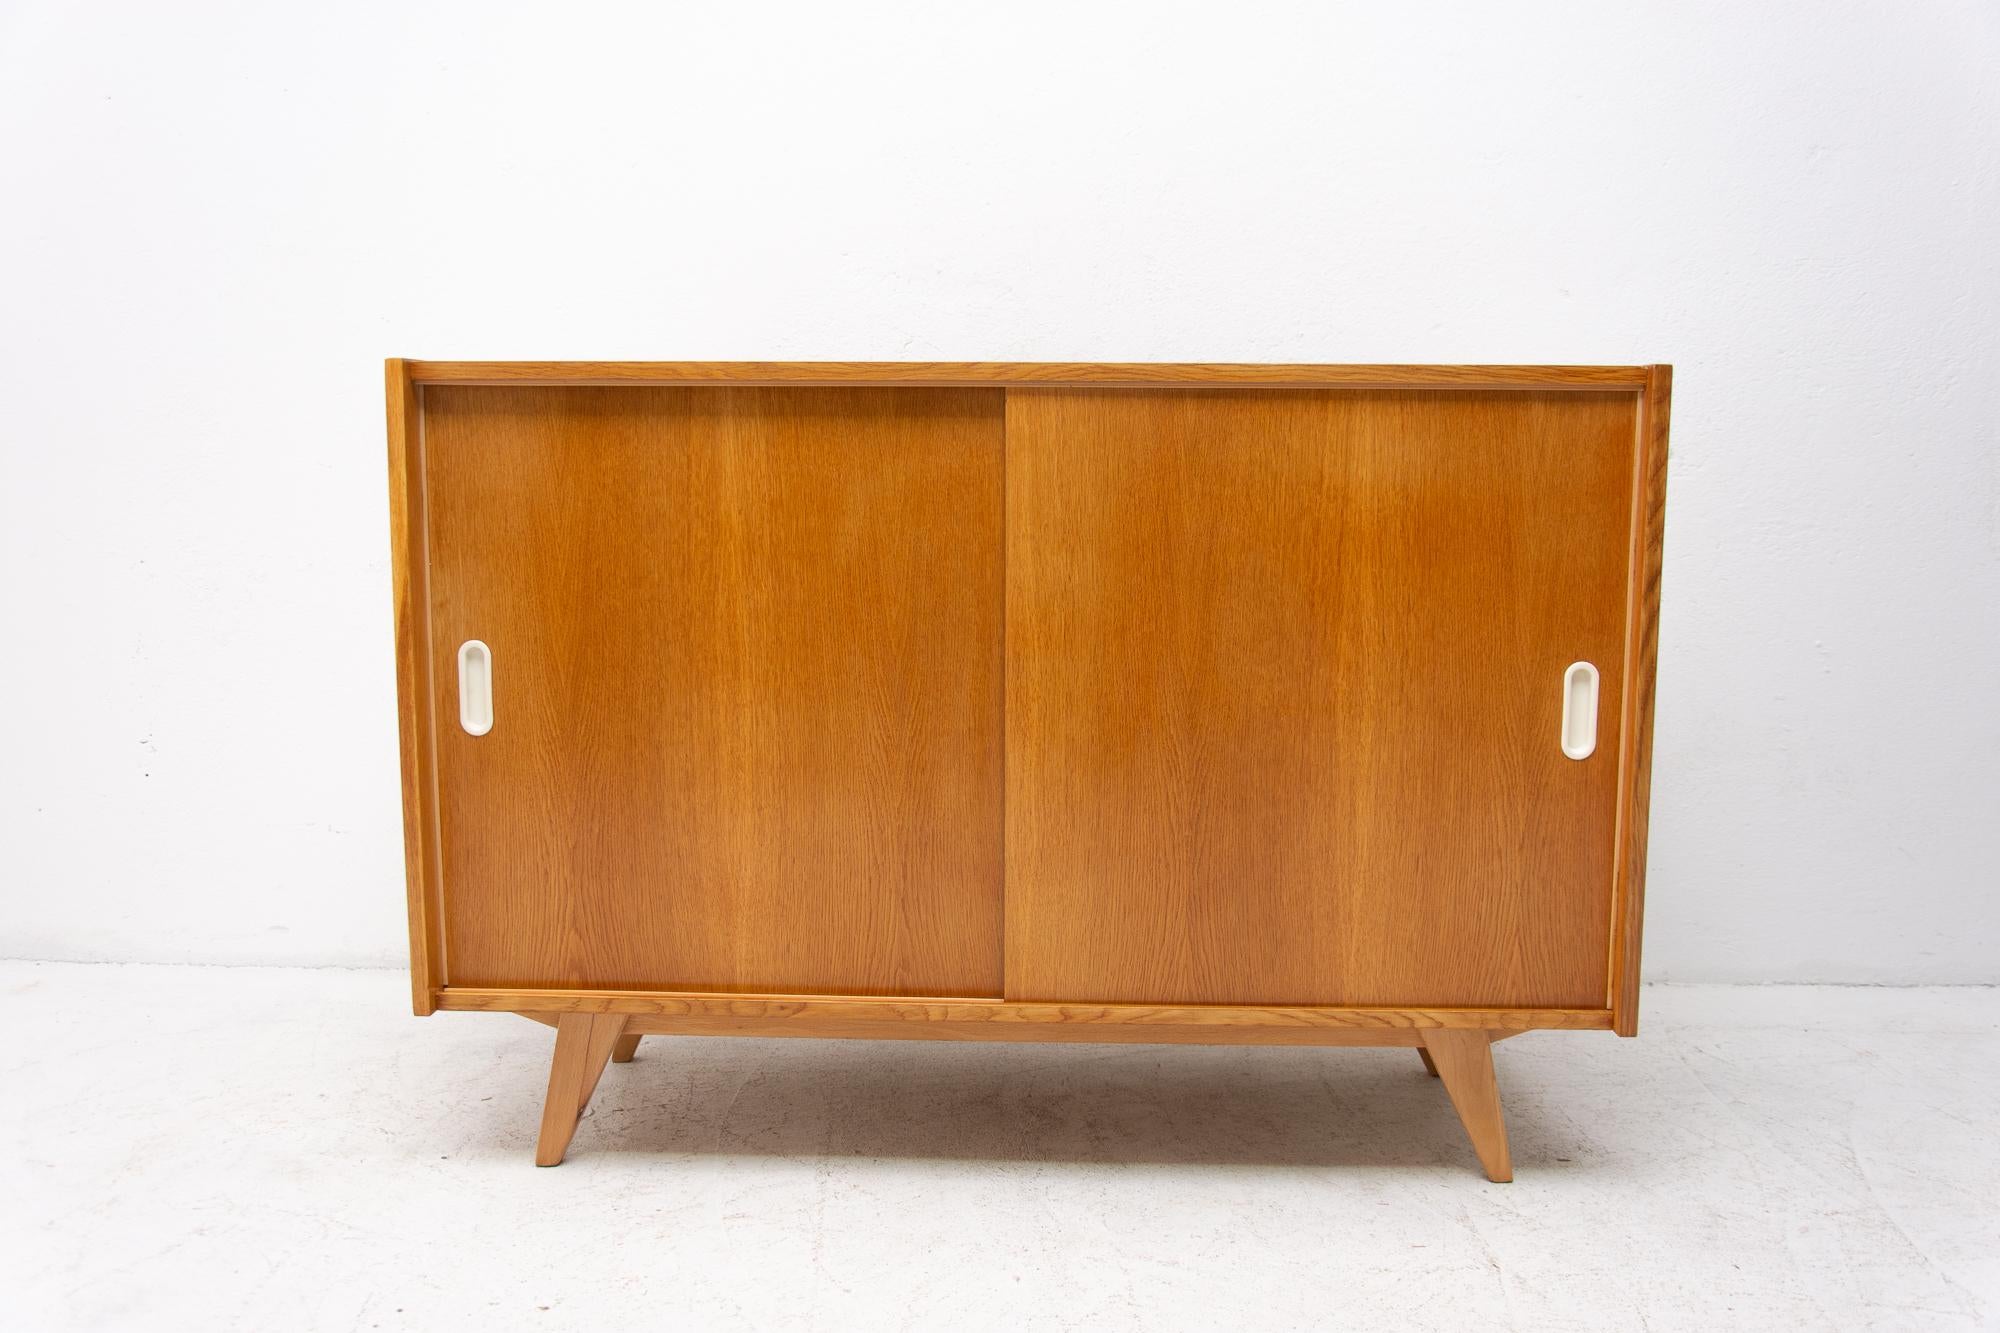 Midcentury sideboard with sliding doors and one long shelf inside, designed by Jirí Jiroutek in the 1960s. It´s made of oak wood. In excellent condition, fully refurbished.